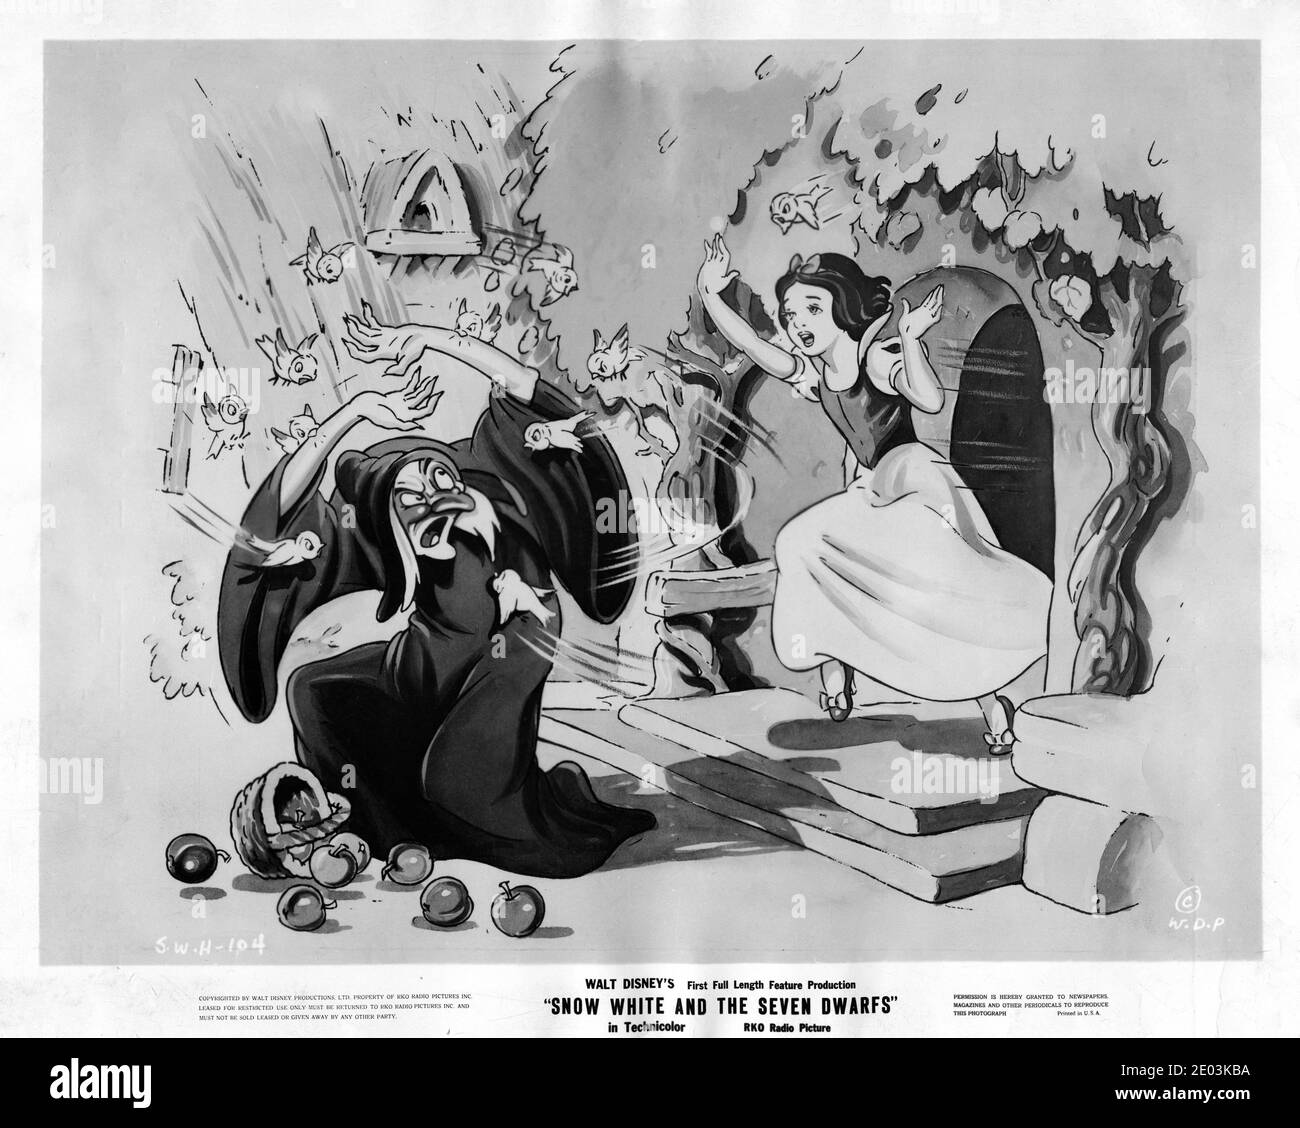 WALT DISNEY's SNOW WHITE AND THE SEVEN DWARFS 1937 supervising director DAVID HAND story Jacob and Wilhelm Grimm  Walt Disney Productions / RKO Radio Pictures Stock Photo